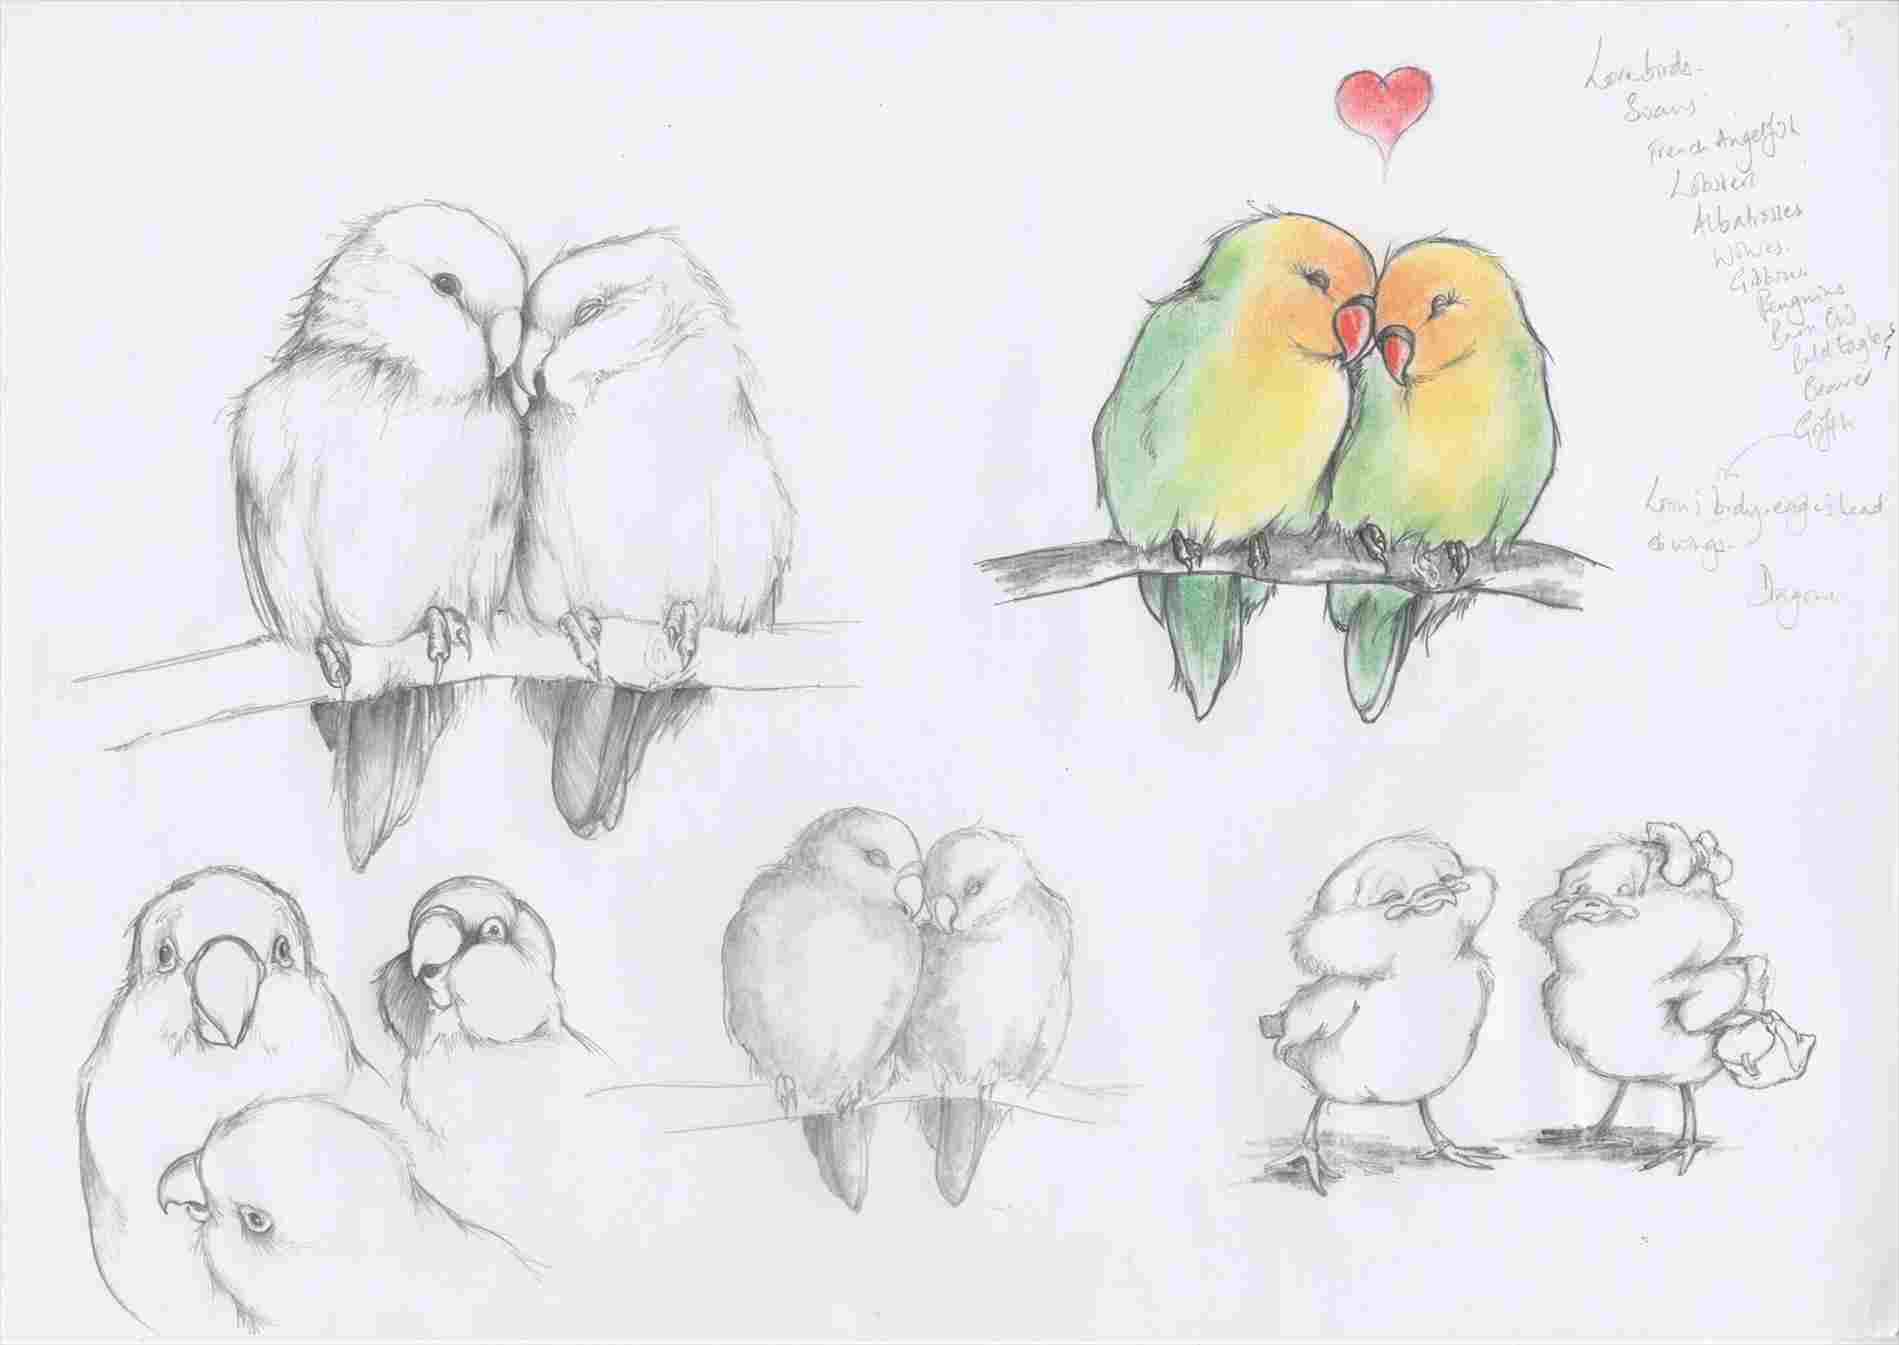 Love Birds Sketch At Paintingvalley Com Explore Collection Of Love Birds Sketch Bird drawing stock photos and images 172066 matches. love birds sketch at paintingvalley com